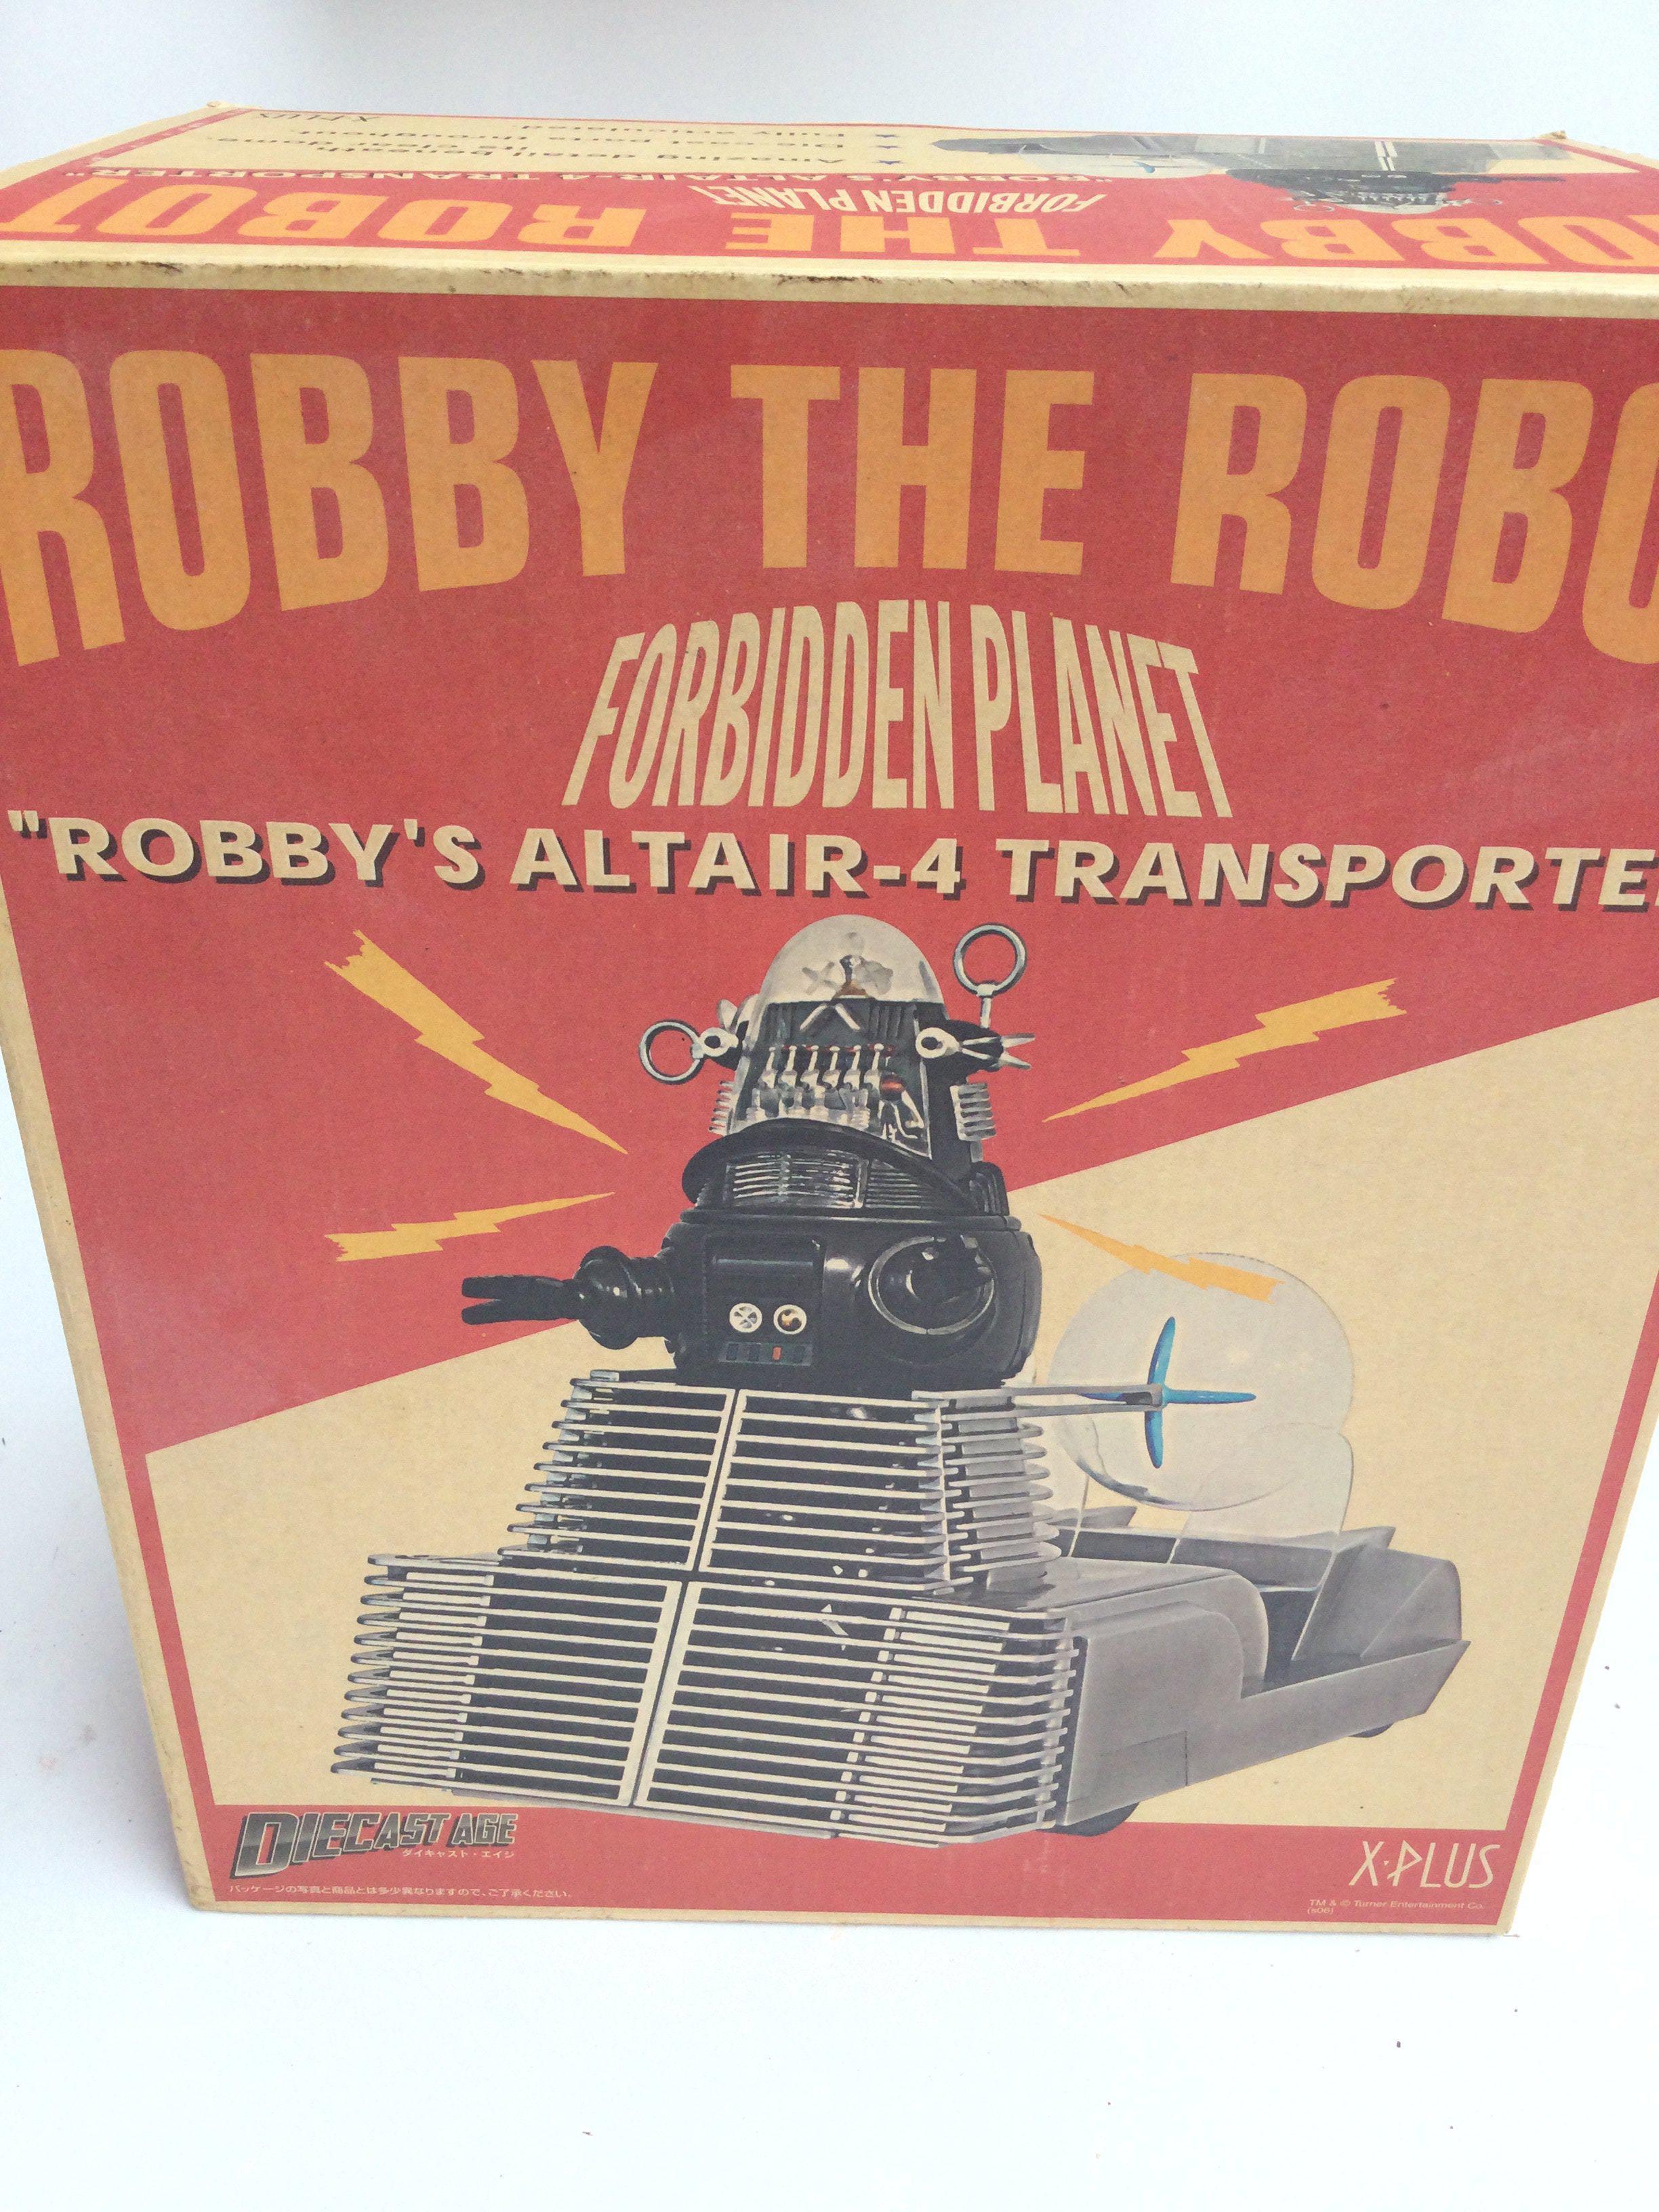 A Boxed X-Plus Forbidden Planet Robby The Robot-Ro